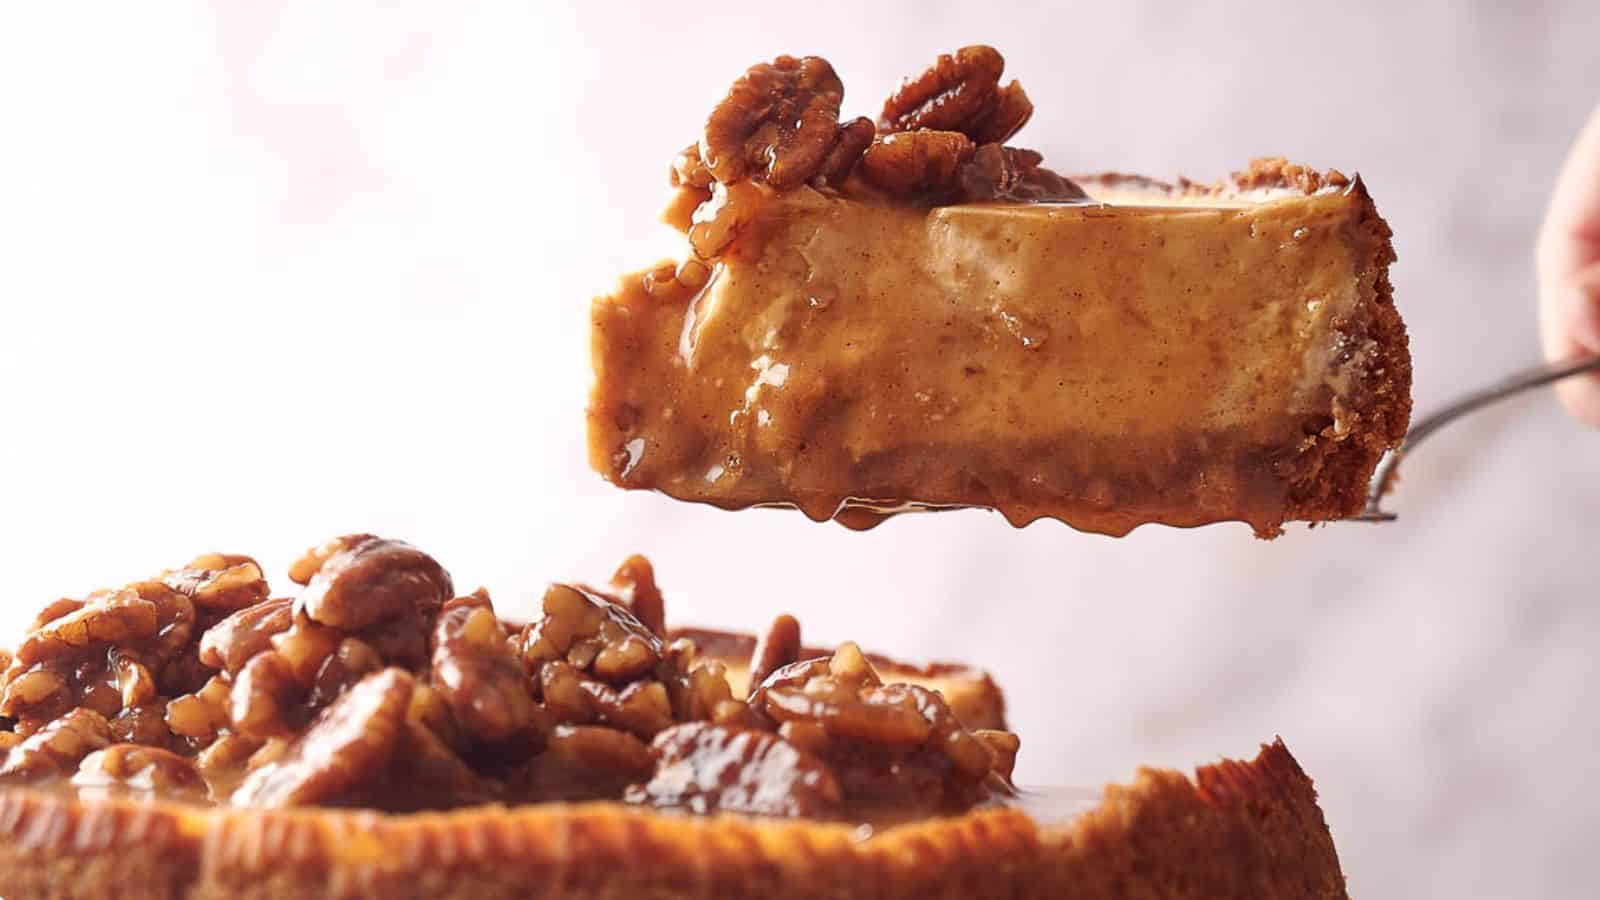 A slice of pecan pie being served on a cake slice.